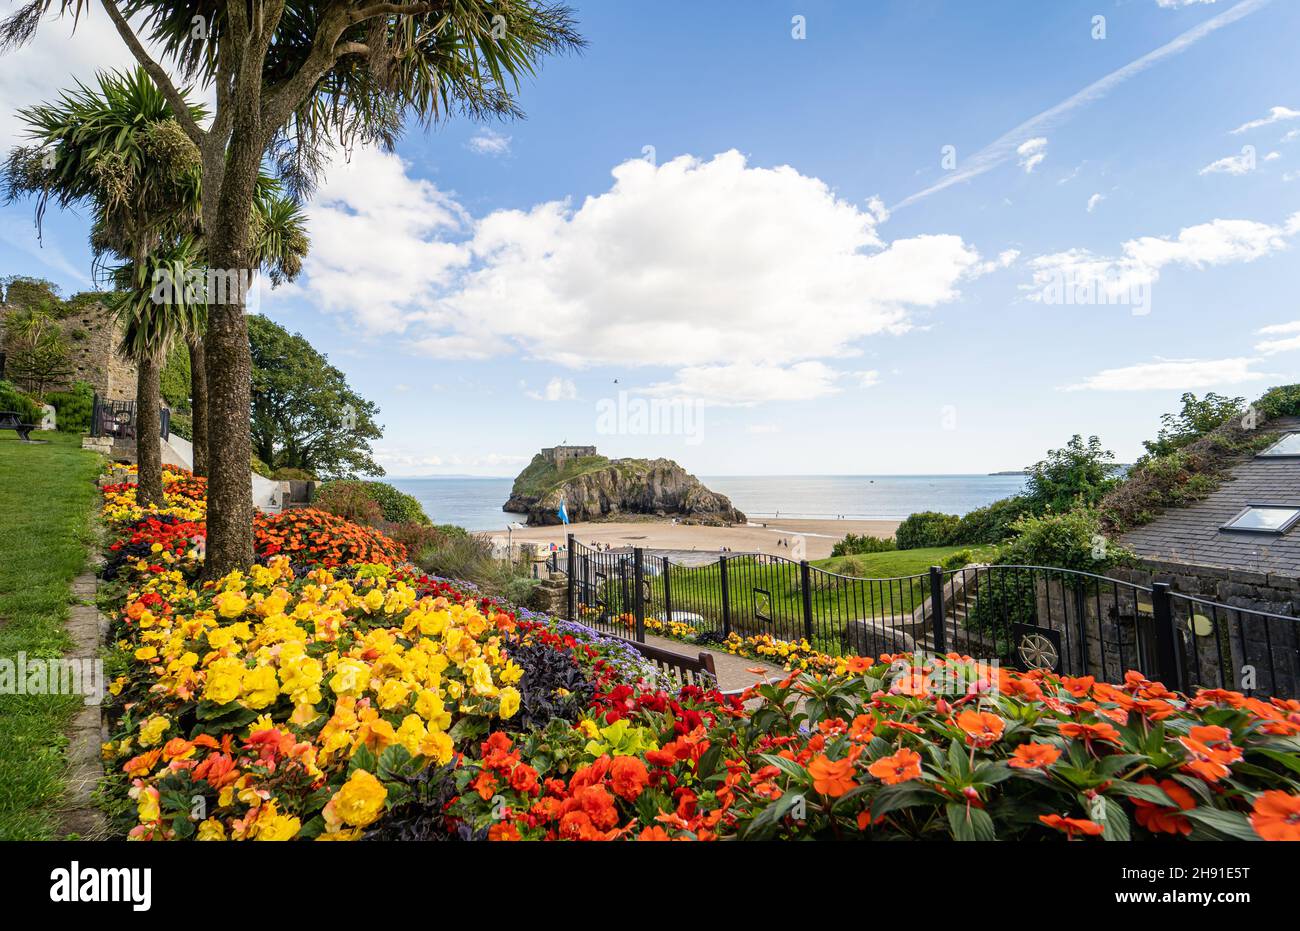 Tenby St Catherine's Island view. A small tidal island with Fort linked to Tenby by Castle beach at low tide. Tenby, Pembrokeshire, Wales, United Kingdom - October 10, 2021 Stock Photo